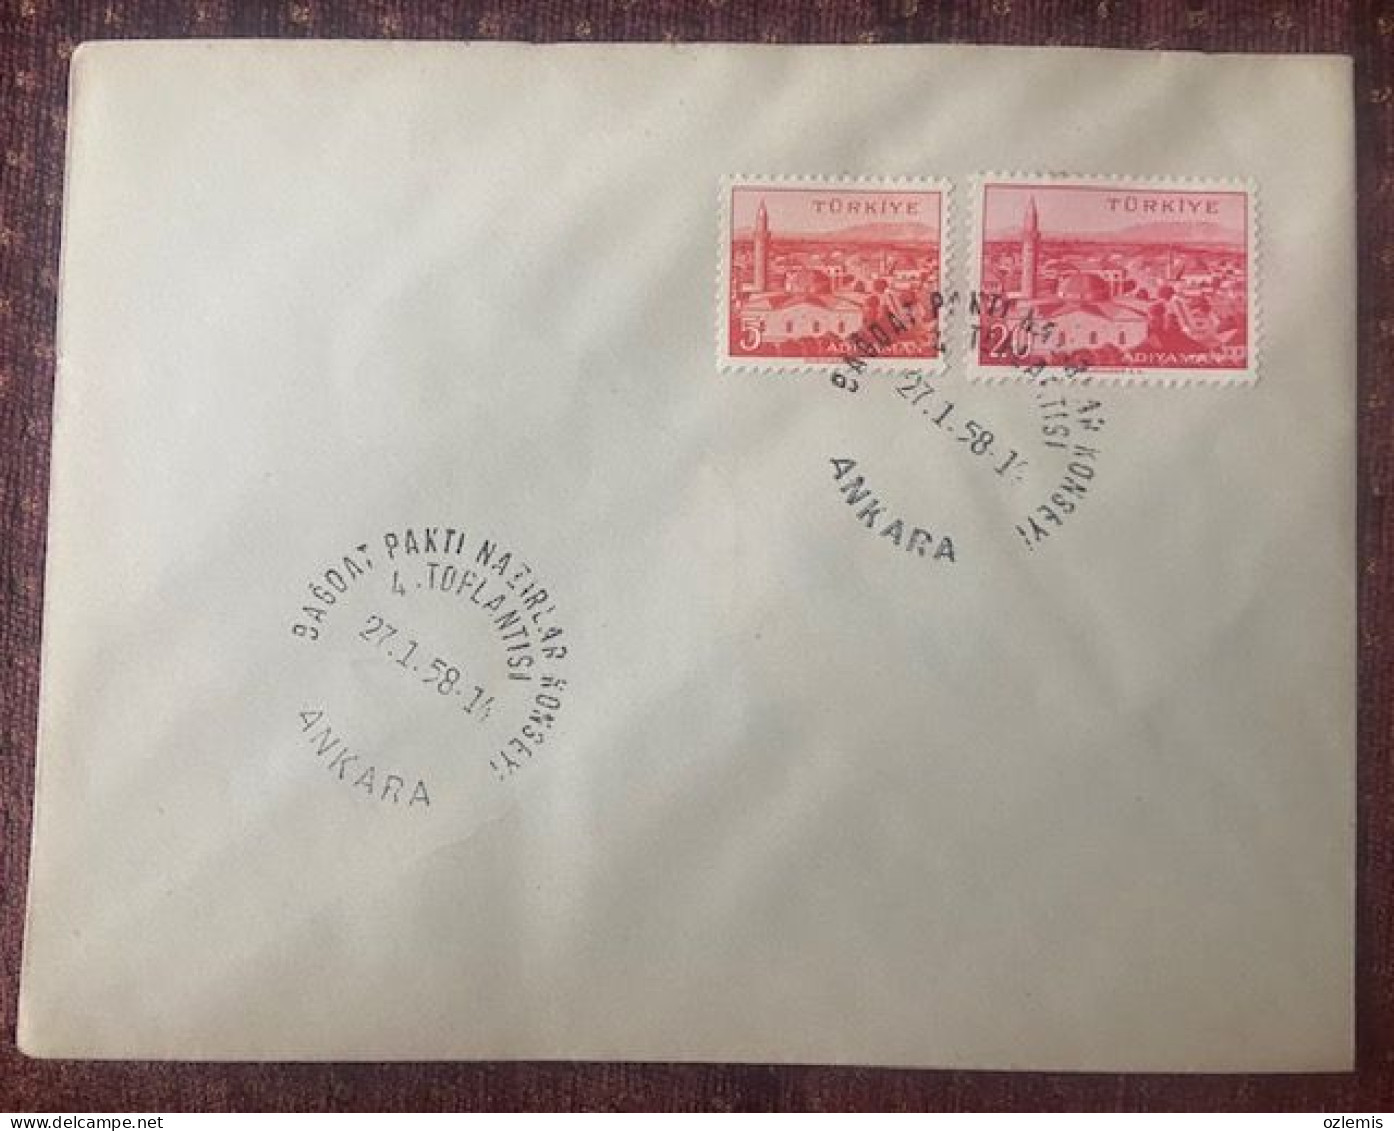 TURKEY,TURKEI,TURQUIE ,ADIYAMAN ,STAMP,THE 4TH MEETING OF THE BAGDAT PACT ,1958 ,COVER - Covers & Documents